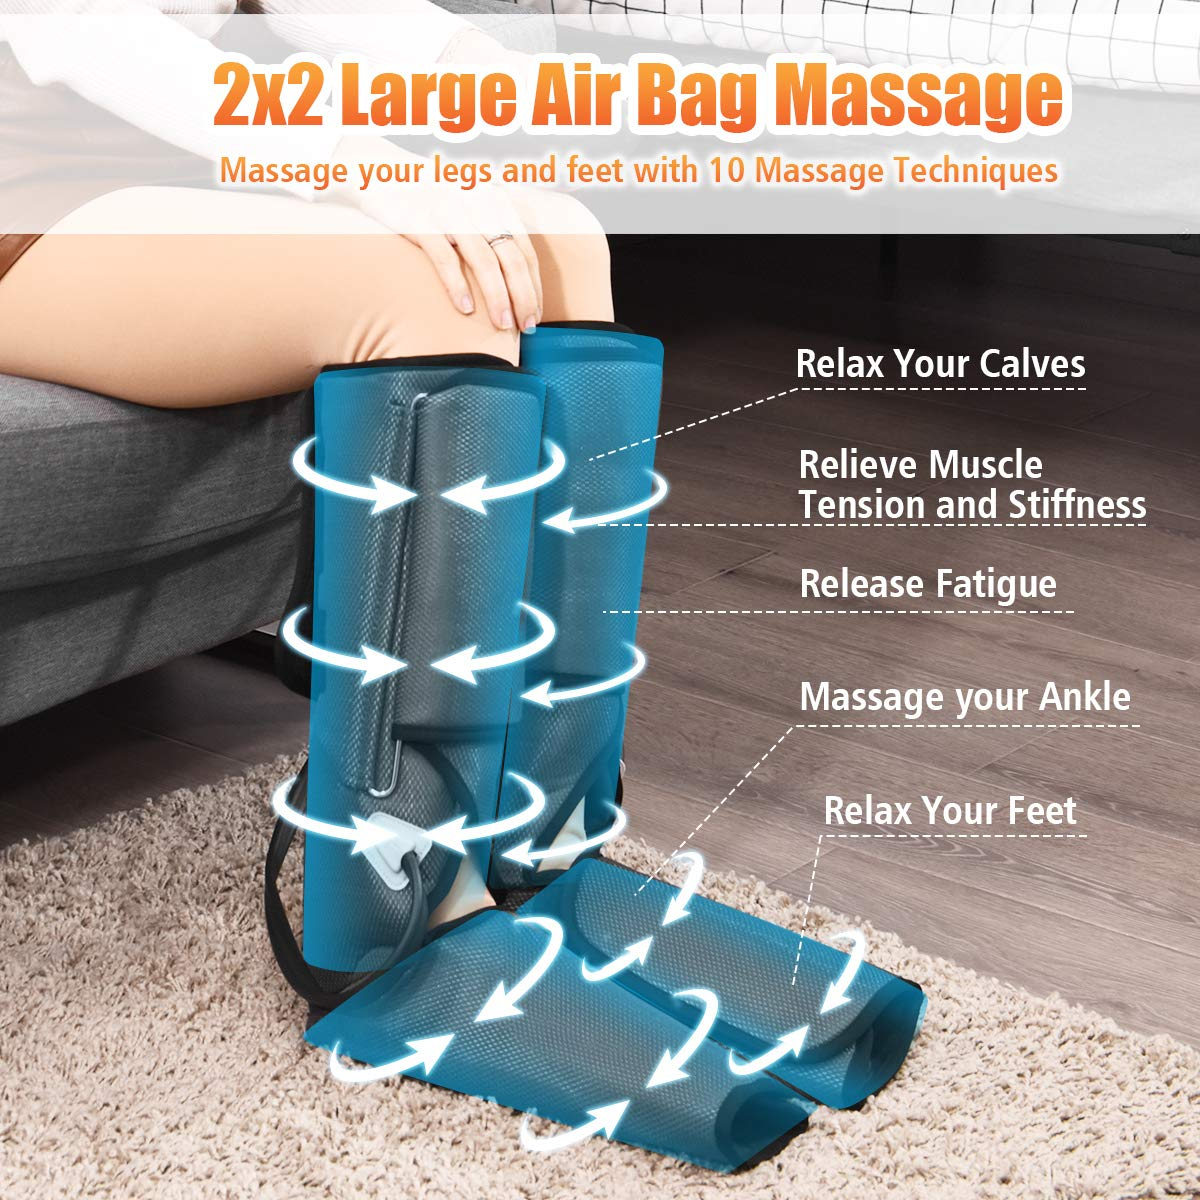 Giantex Air Compression Leg Massager Wraps Foot and Calf Massage with Handheld Controller